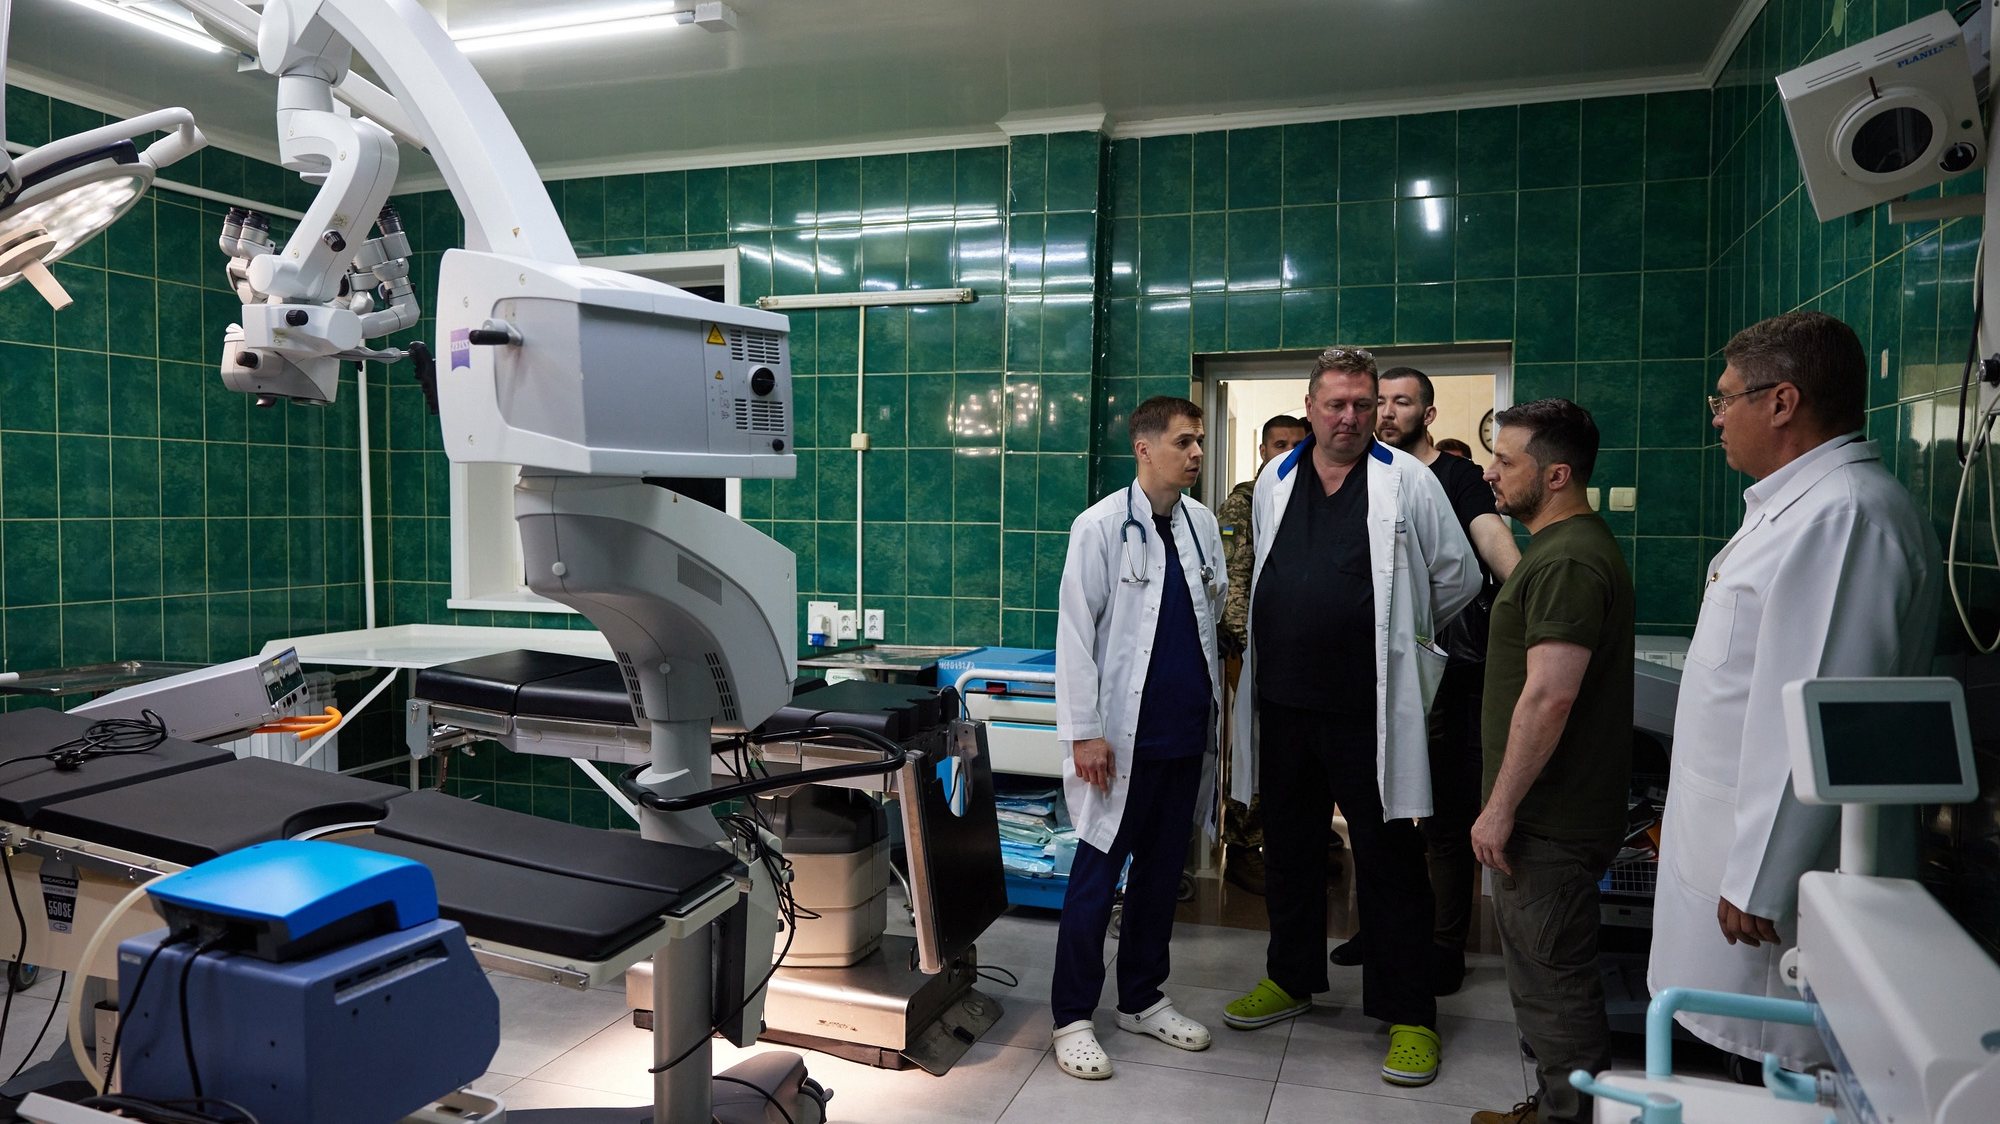 epa10019949 A handout photo made available by the Ukrainian Presidential Press Service shows Ukrainian President Volodymyr Zelensky (2-R) during a visit to a local hospital, in the Black Sea port city of Mykolaiv, southern Ukraine, 18 June 2022. During a working visit to the Mykolaiv region, President Zelensky visited the ambulance hospital in Mykolaiv where he inspected medical equipment and the surgery department as well as meeting with servicemen and civilians receiving medical treatment.  EPA/UKRAINIAN PRESIDENTIAL PRESS SERVICE HANDOUT -- MANDATORY CREDIT: UKRAINIAN PRESIDENTIAL PRESS SERVICE -- HANDOUT EDITORIAL USE ONLY/NO SALES